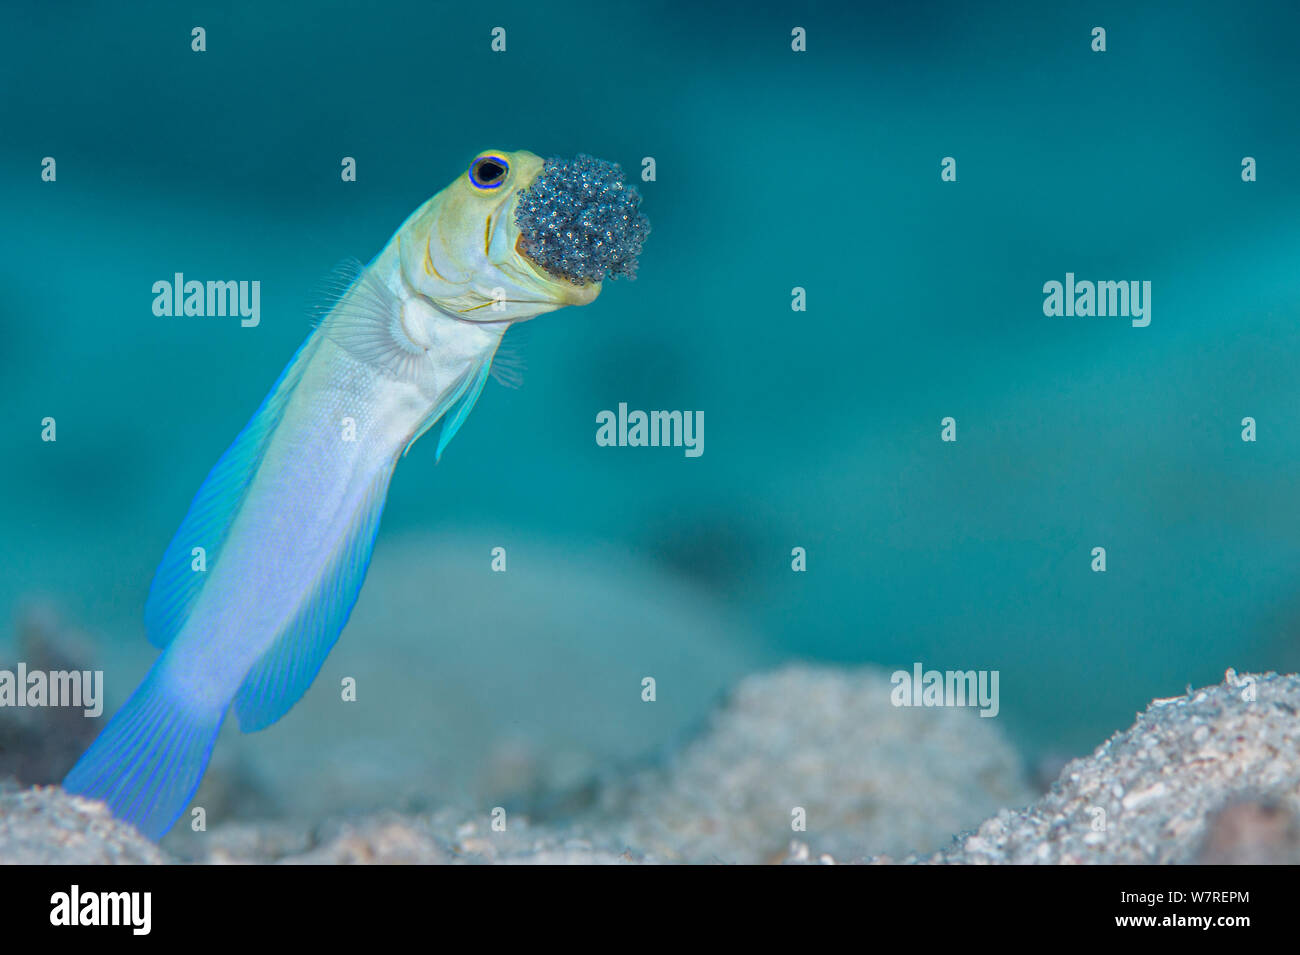 Male Yellow-headed jawfish (Opistognathus aurifrons) blows out the clutch of eggs he is incubating in his mouth to oxygenate them. East End, Grand Cayman, Cayman Islands, British West Indies. Caribbean Sea. Stock Photo